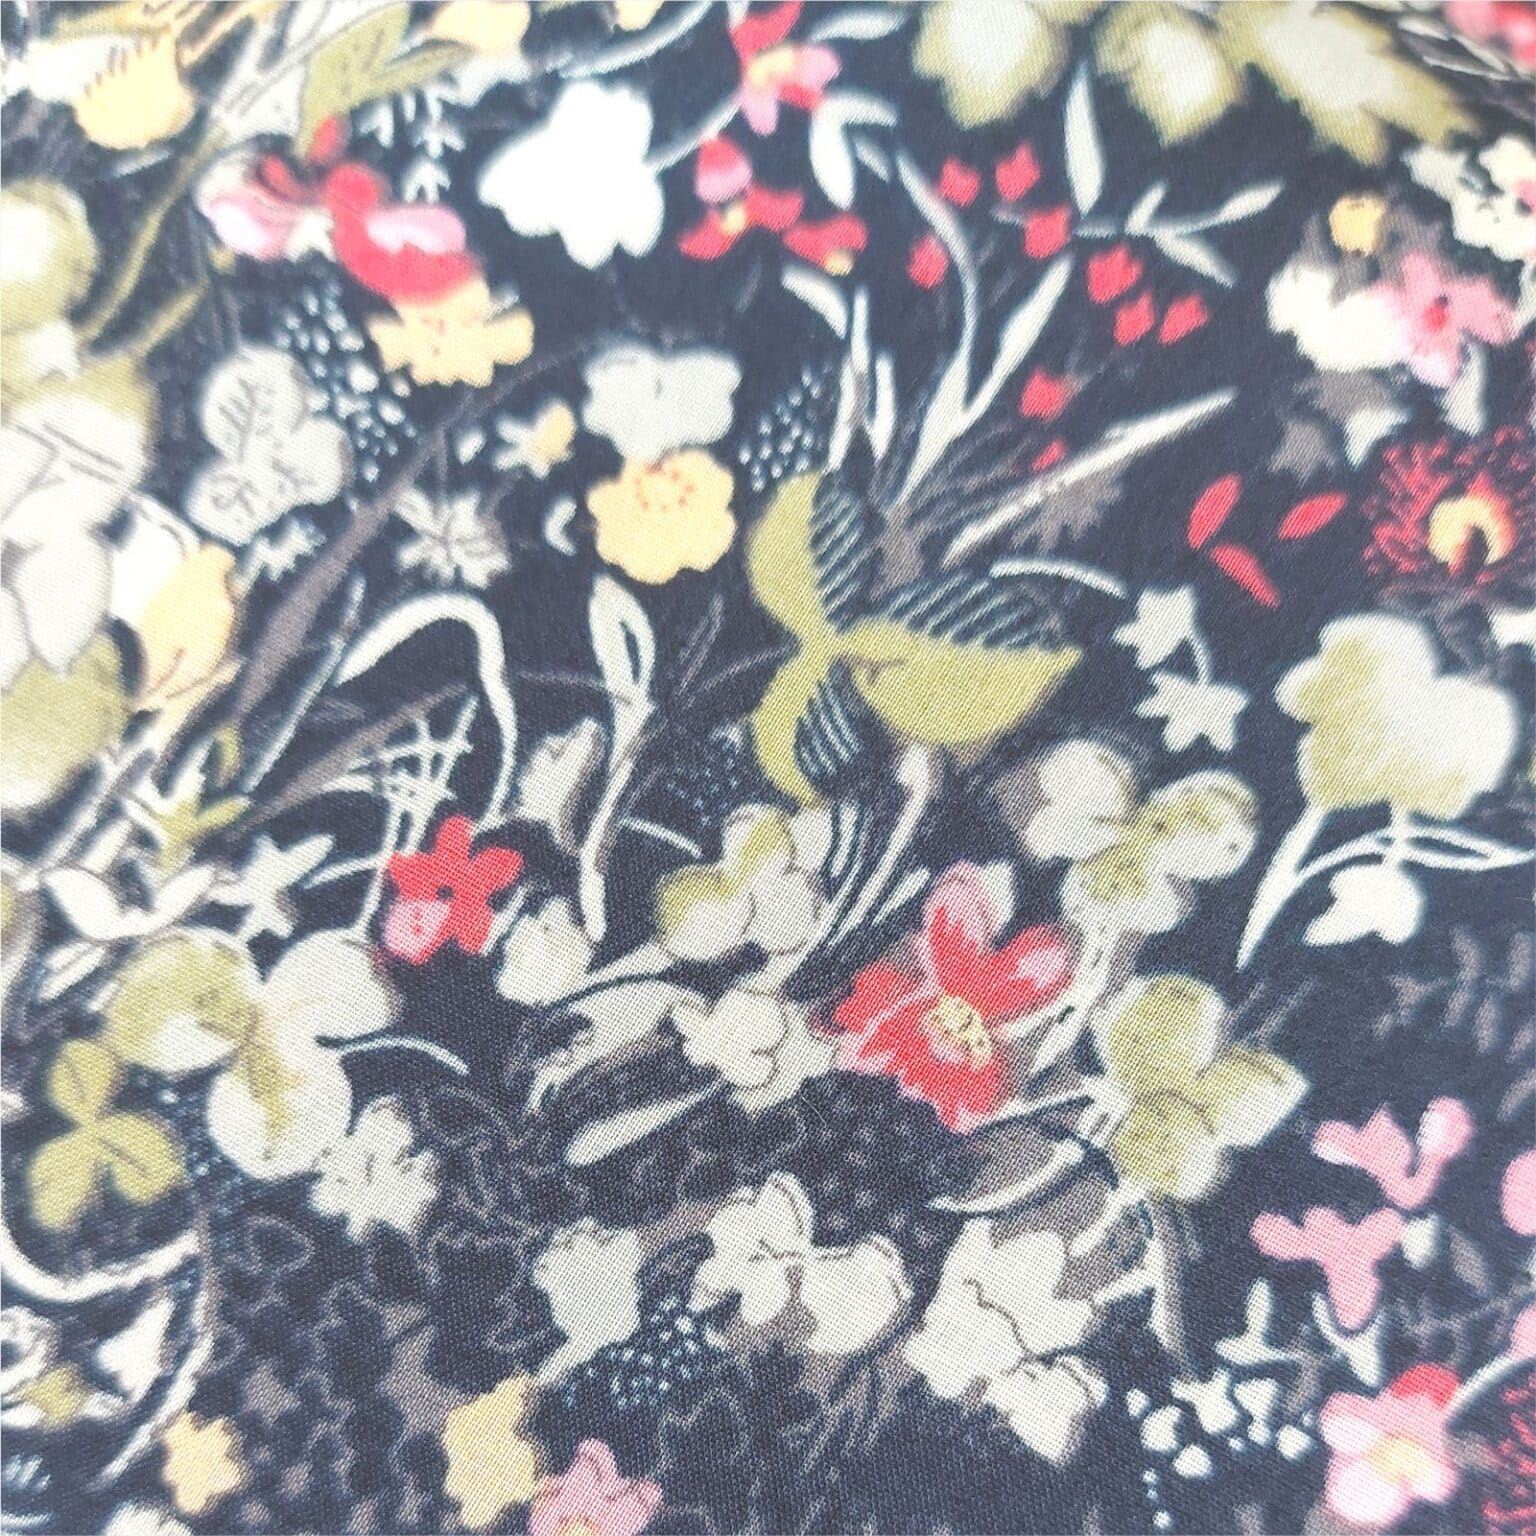 buy pima cotton lawn fabric at More Sewing for dressmaking